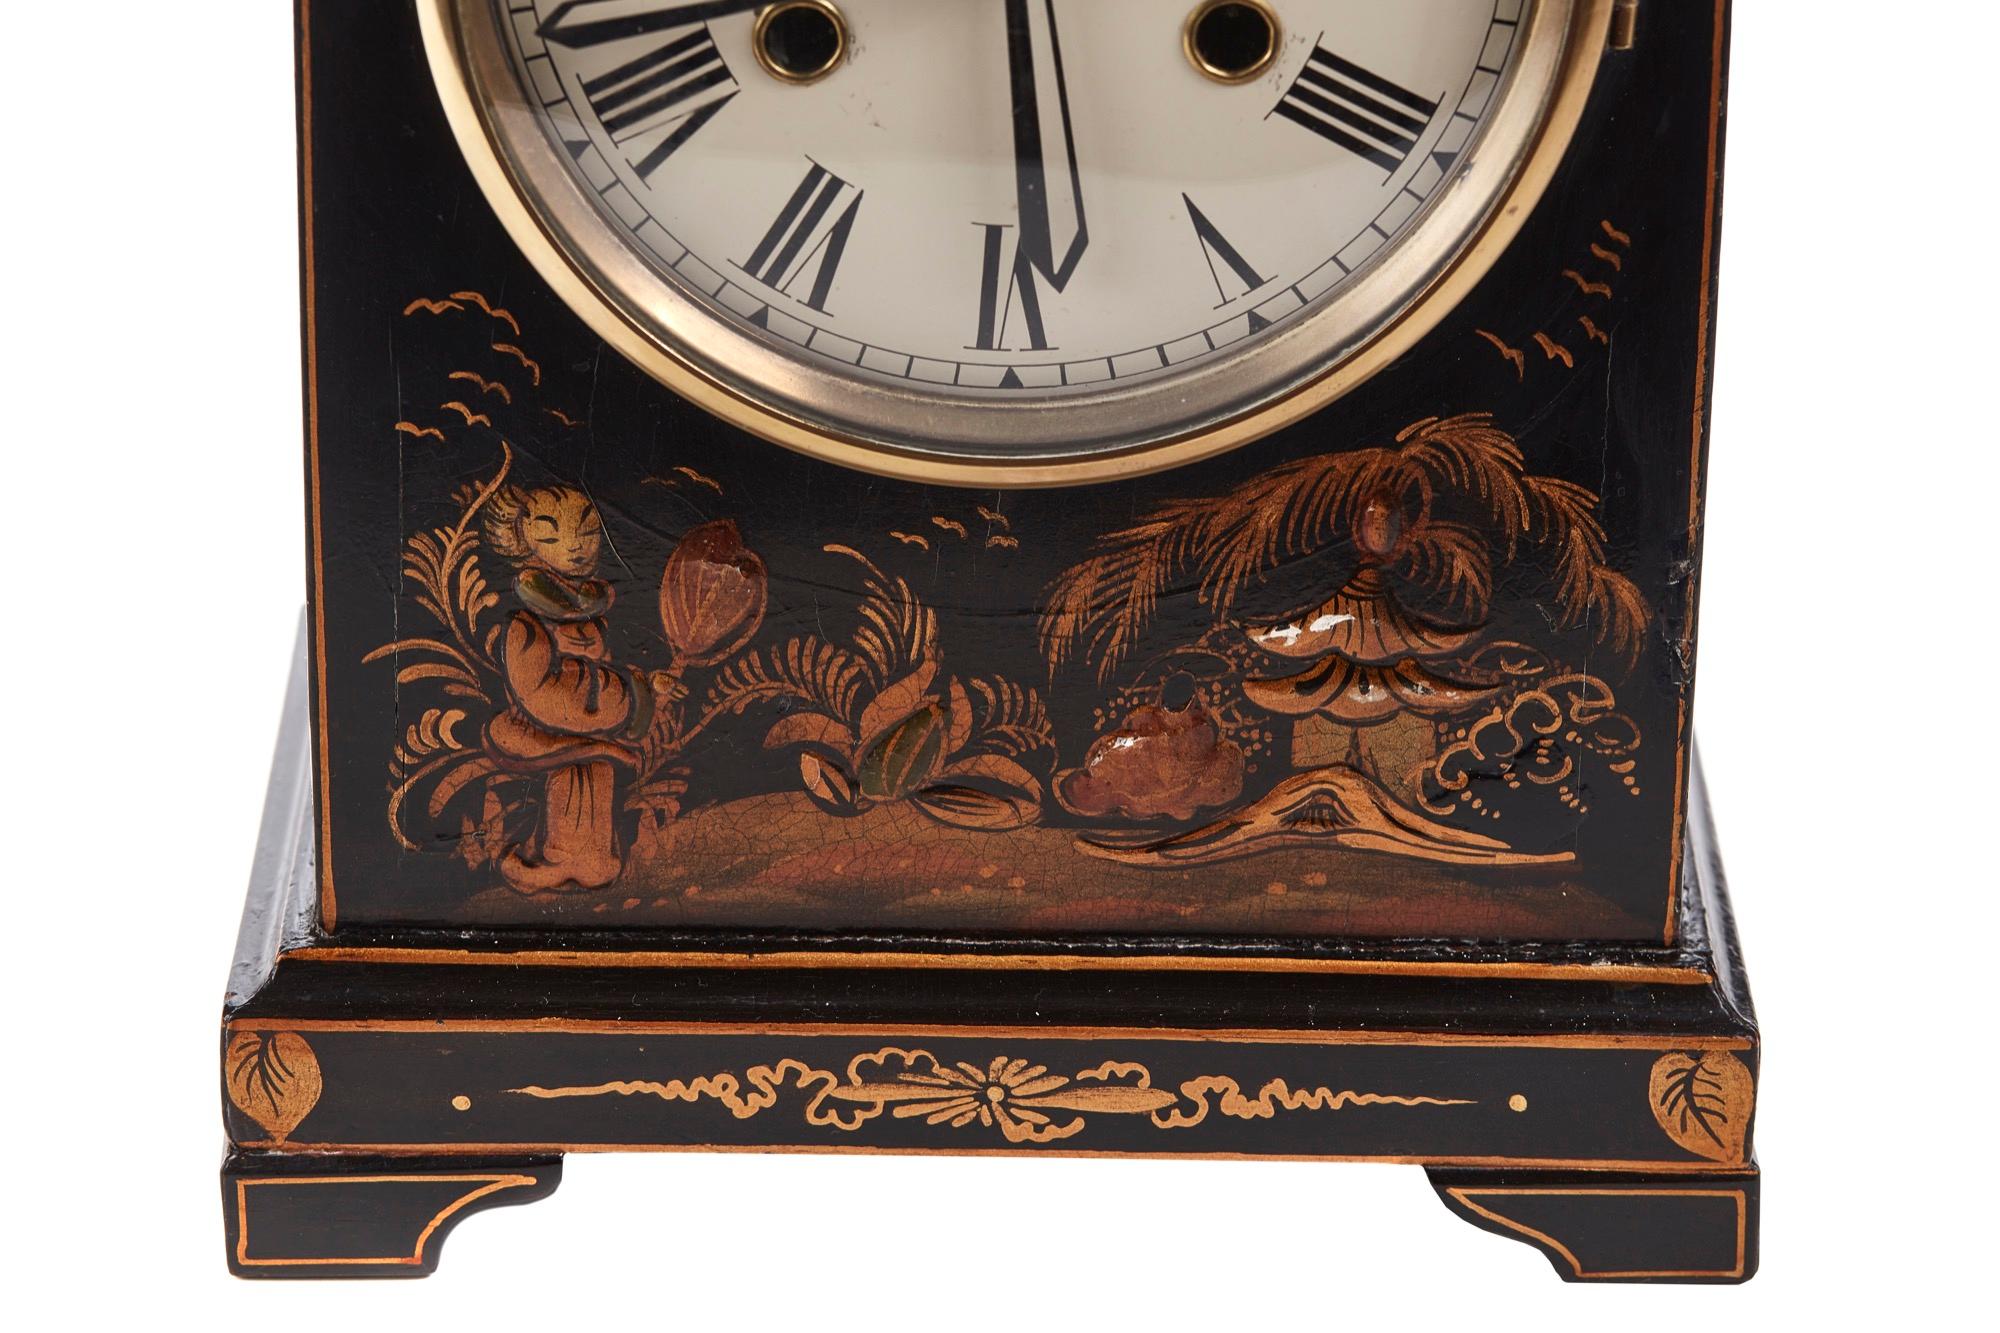 Offered for sale is this chinoiserie cased dome topped mantel clock with circular dial and twin chain movement. Lacquered case, 8 day movement. Perfect working order and original key.